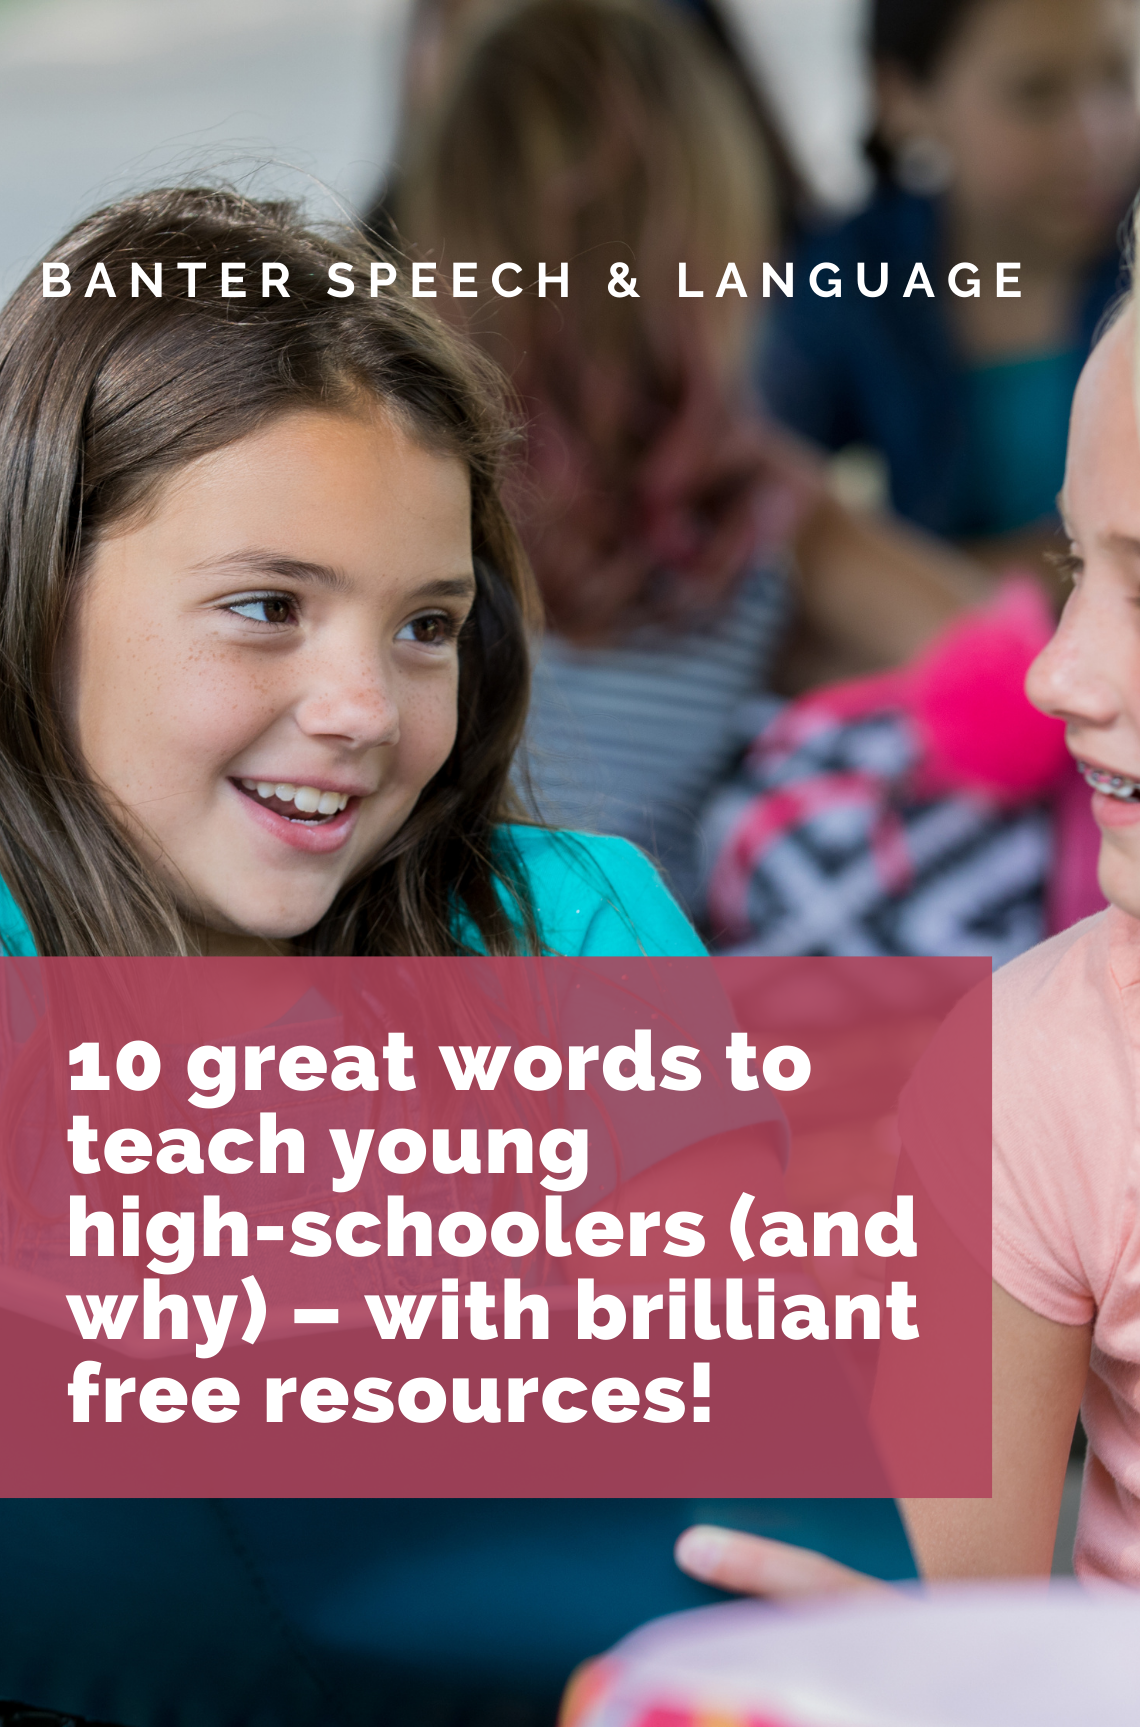 10 great words to teach young high-schoolers (and why) – with brilliant free resources!